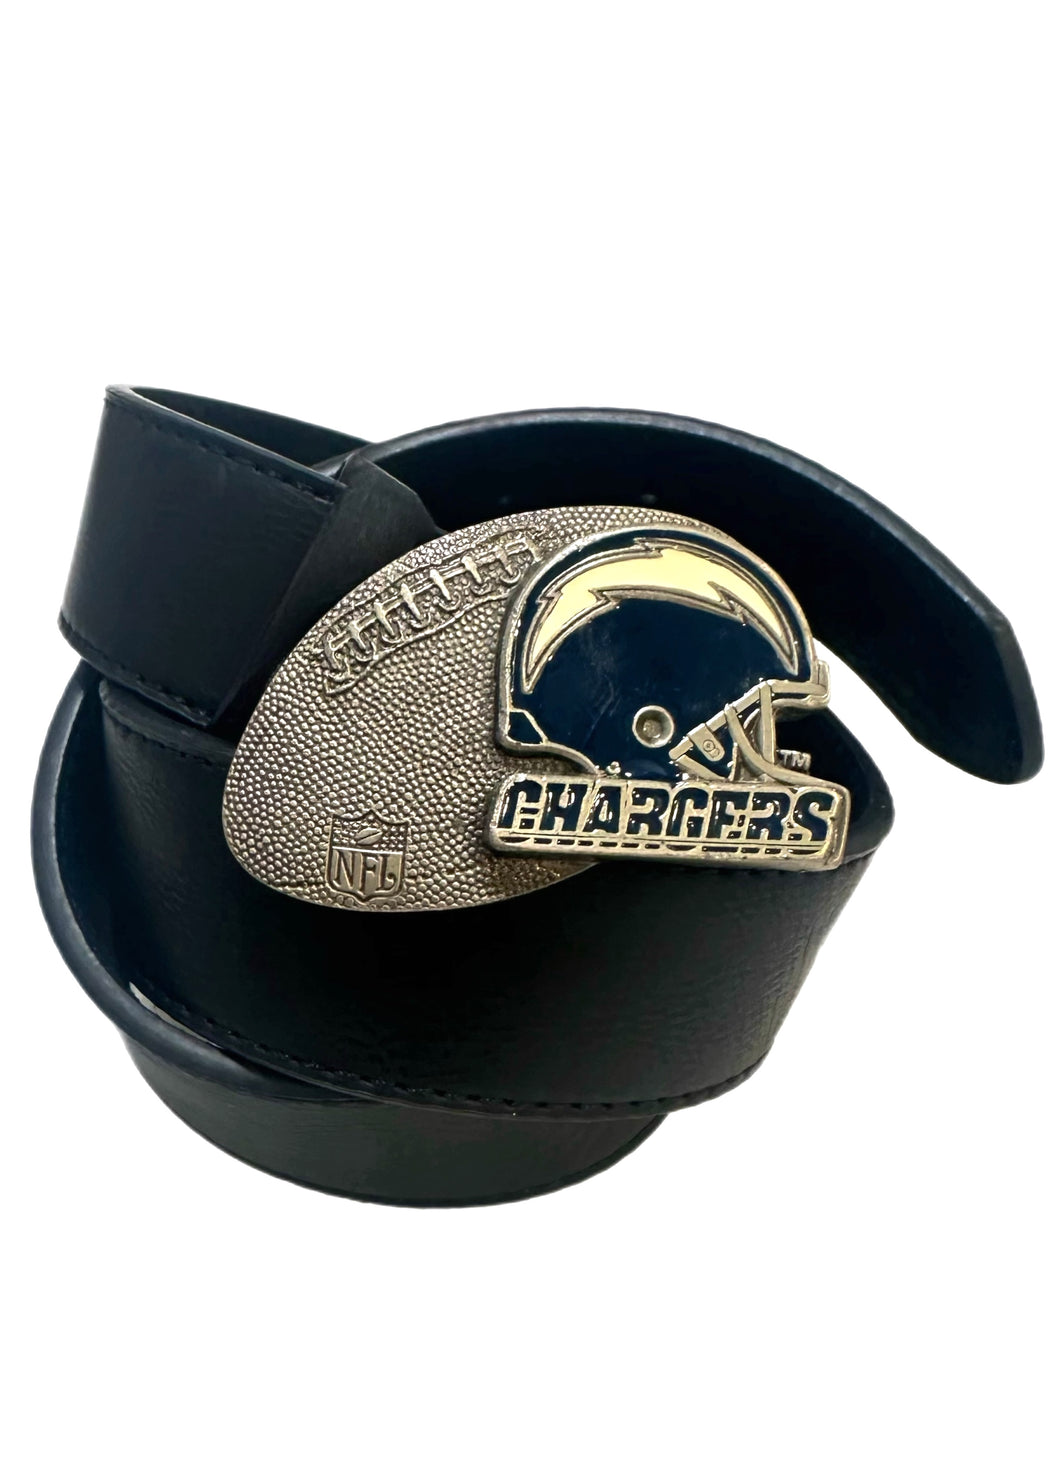 LA Chargers, Football Vintage Belt Buckle with New Soft Leather Strap